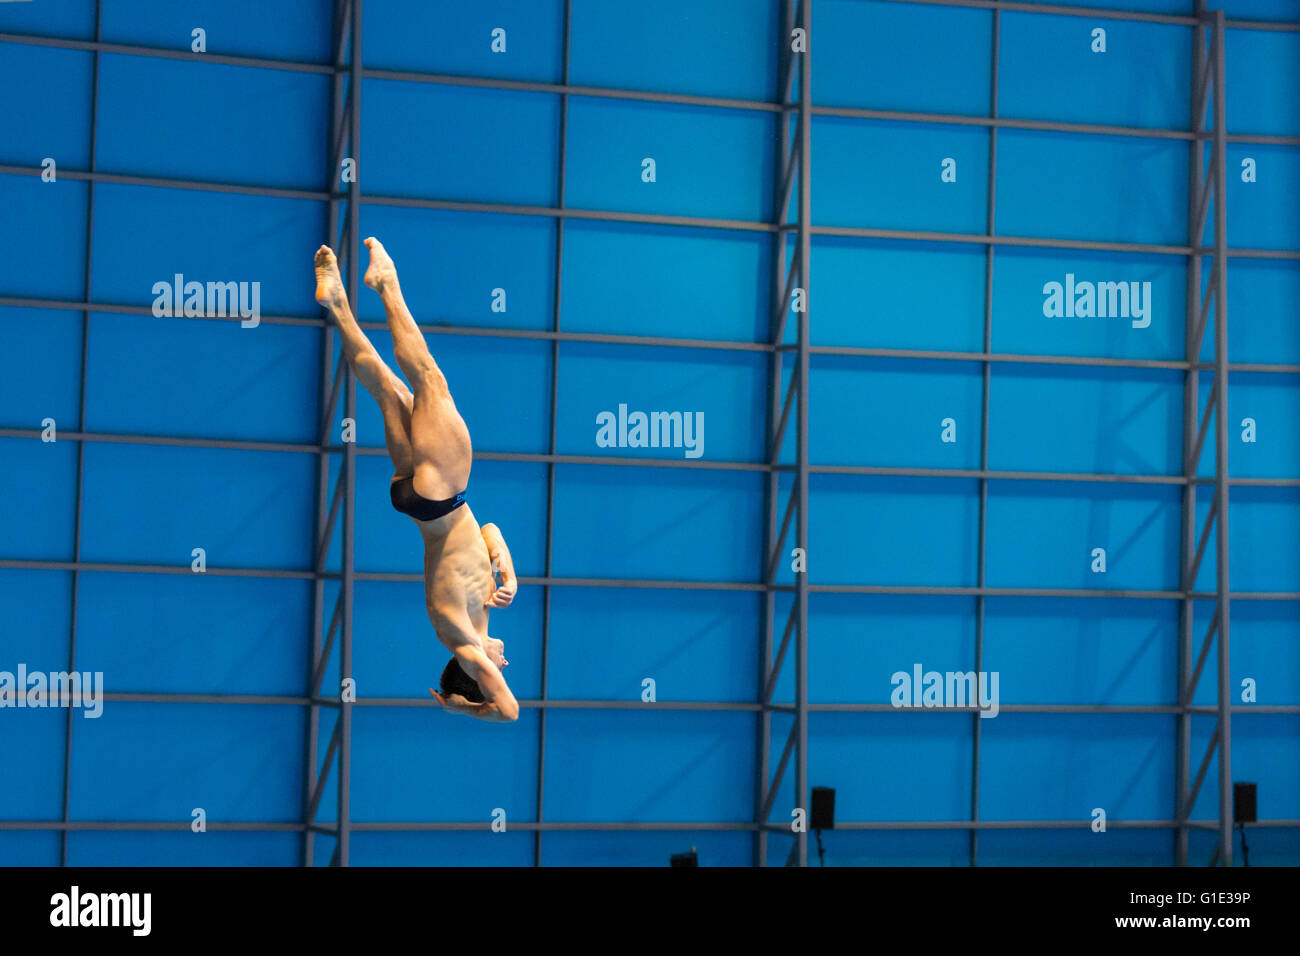 Aquatics Centre, Olympic Park, London, UK. 12th May 2016. Germany's Patrick Hausding, the most successful German diver in the Men's events with gold medals in 2010, 2011 and 2014, during his final round Forward 2 1/2 Somersaults 3 Twists Pike. Russia's Evgeny Cuznetsov takes gold, whilst British local hero Jack Laugher wins silver and Ukraine's Illya Kvasha wins the bronze medal in the Diving Men’s 3m Springboard Final Credit:  Imageplotter News and Sports/Alamy Live News Stock Photo